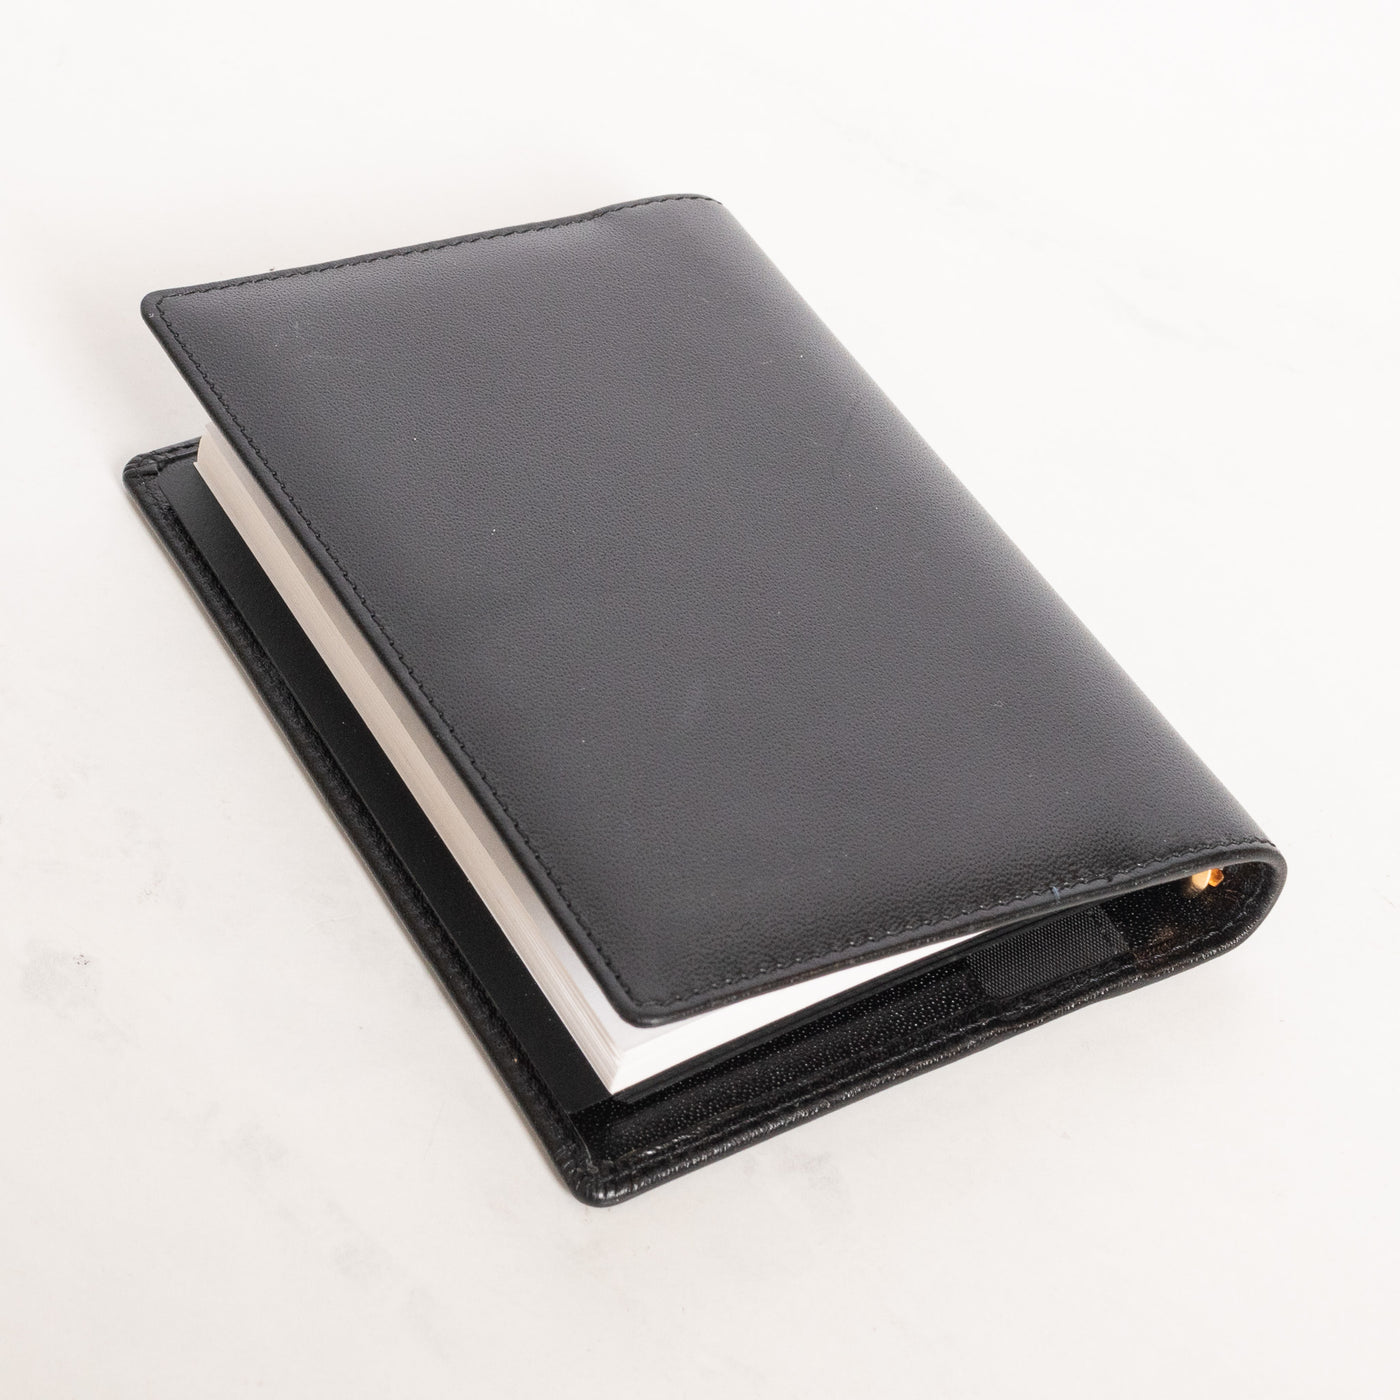 Montblanc Leather Goods Meisterstuck Black Leather Pocket Address Book 3425 - Preowned Back of Booklet